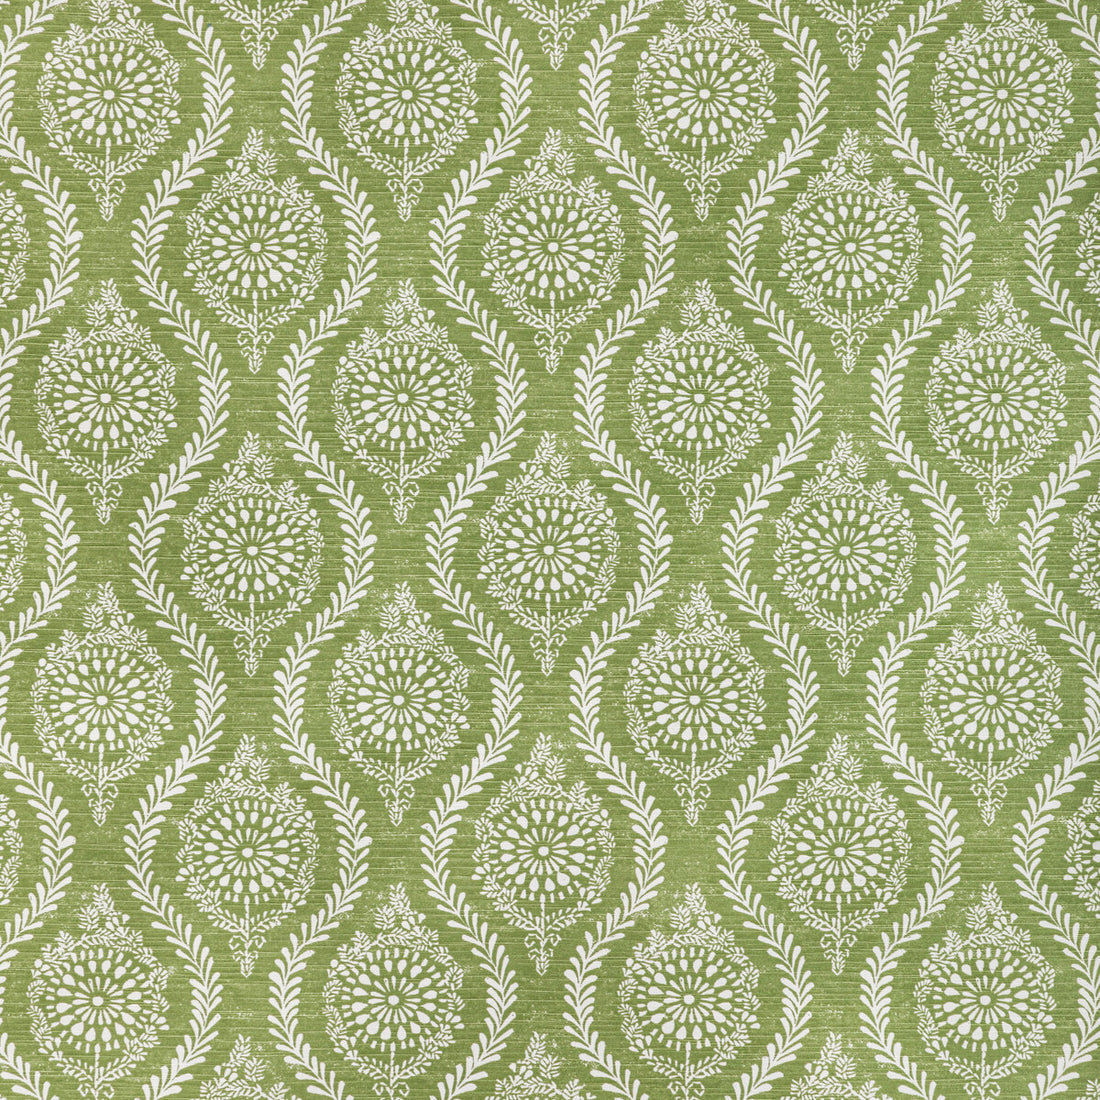 Marindol Print fabric in leaf color - pattern 8022105.3.0 - by Brunschwig &amp; Fils in the Manoir collection